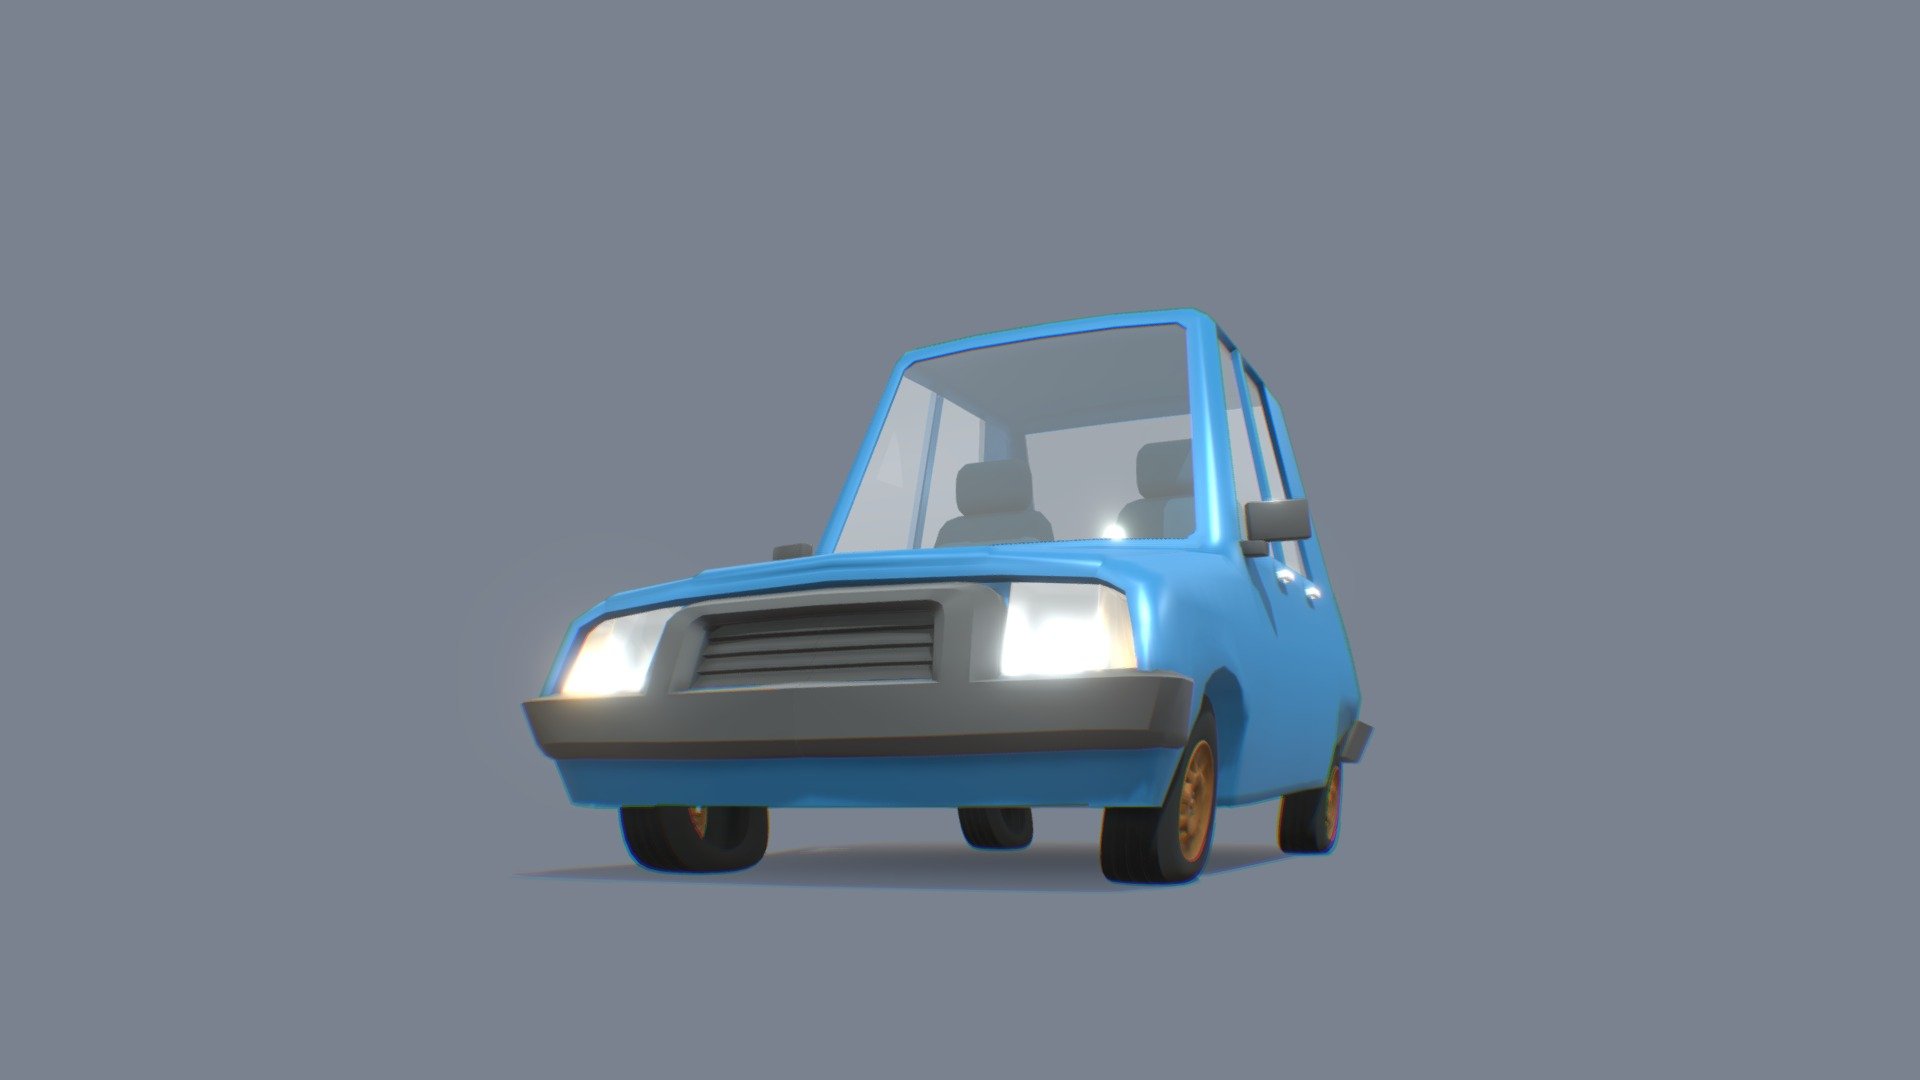 Old Stylized Car

Modeled in Cinema 4D
Materials in Cinema 4D

Simple animation 3d model